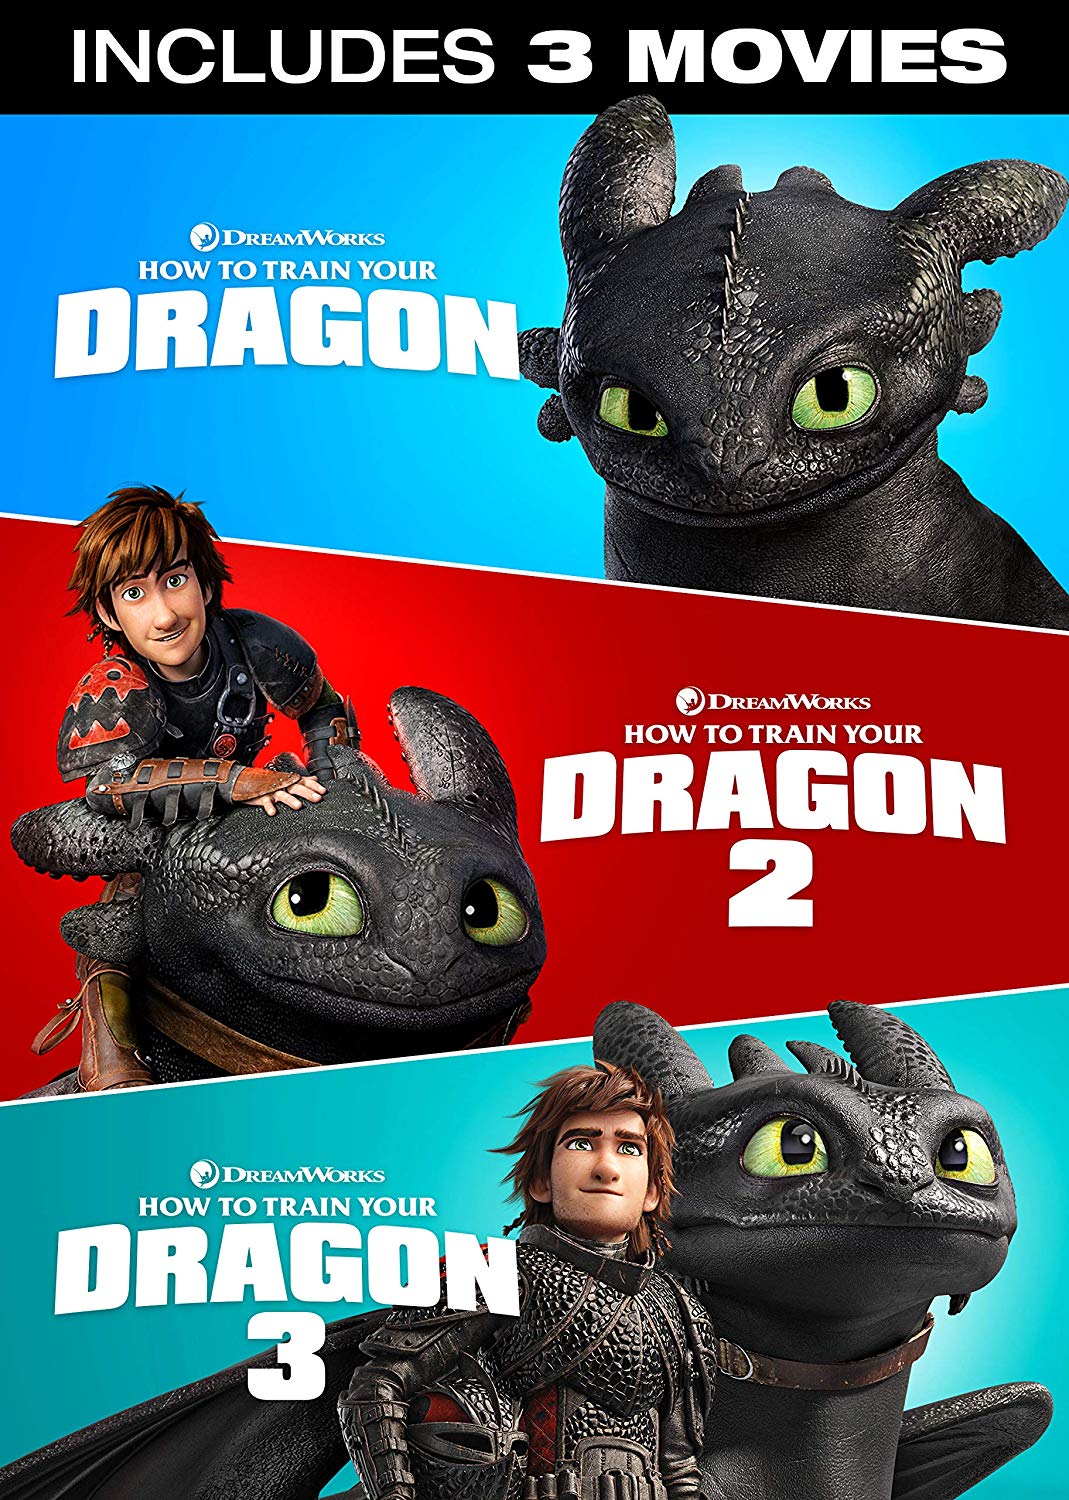 how to train your dragon ebook series download